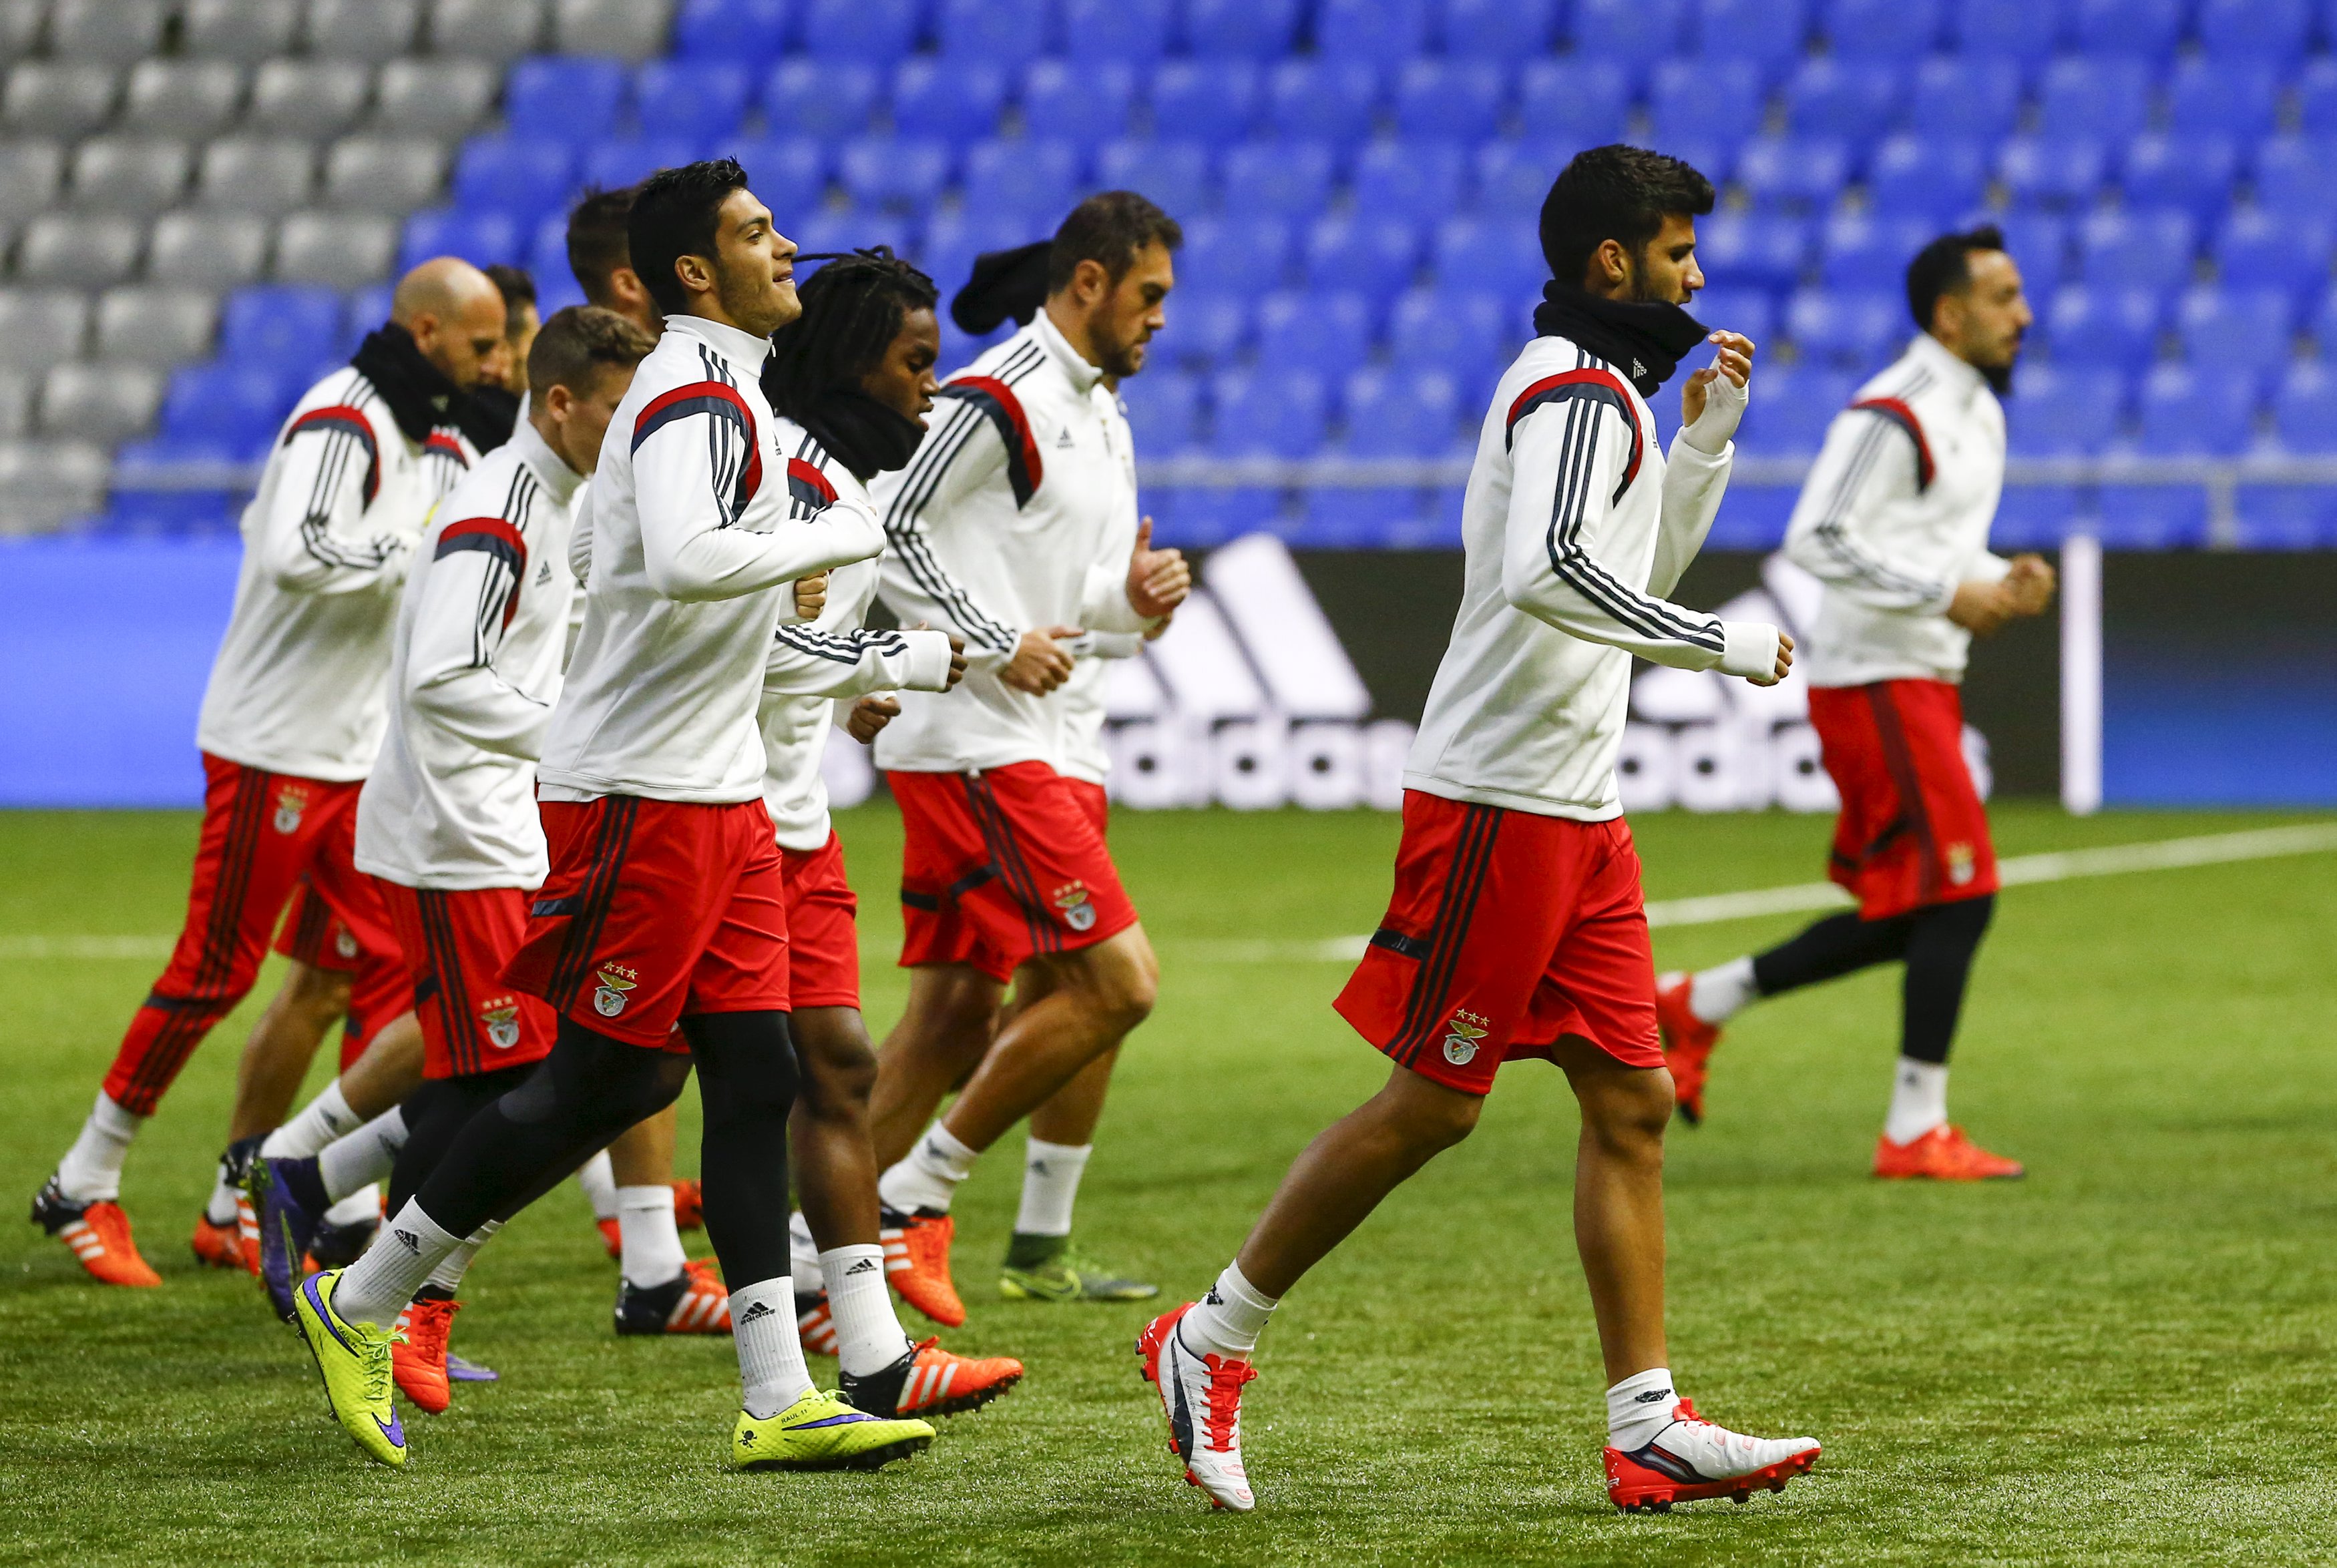 Benfica players attend a training session  on November 24, 2015. Photo: Reuters